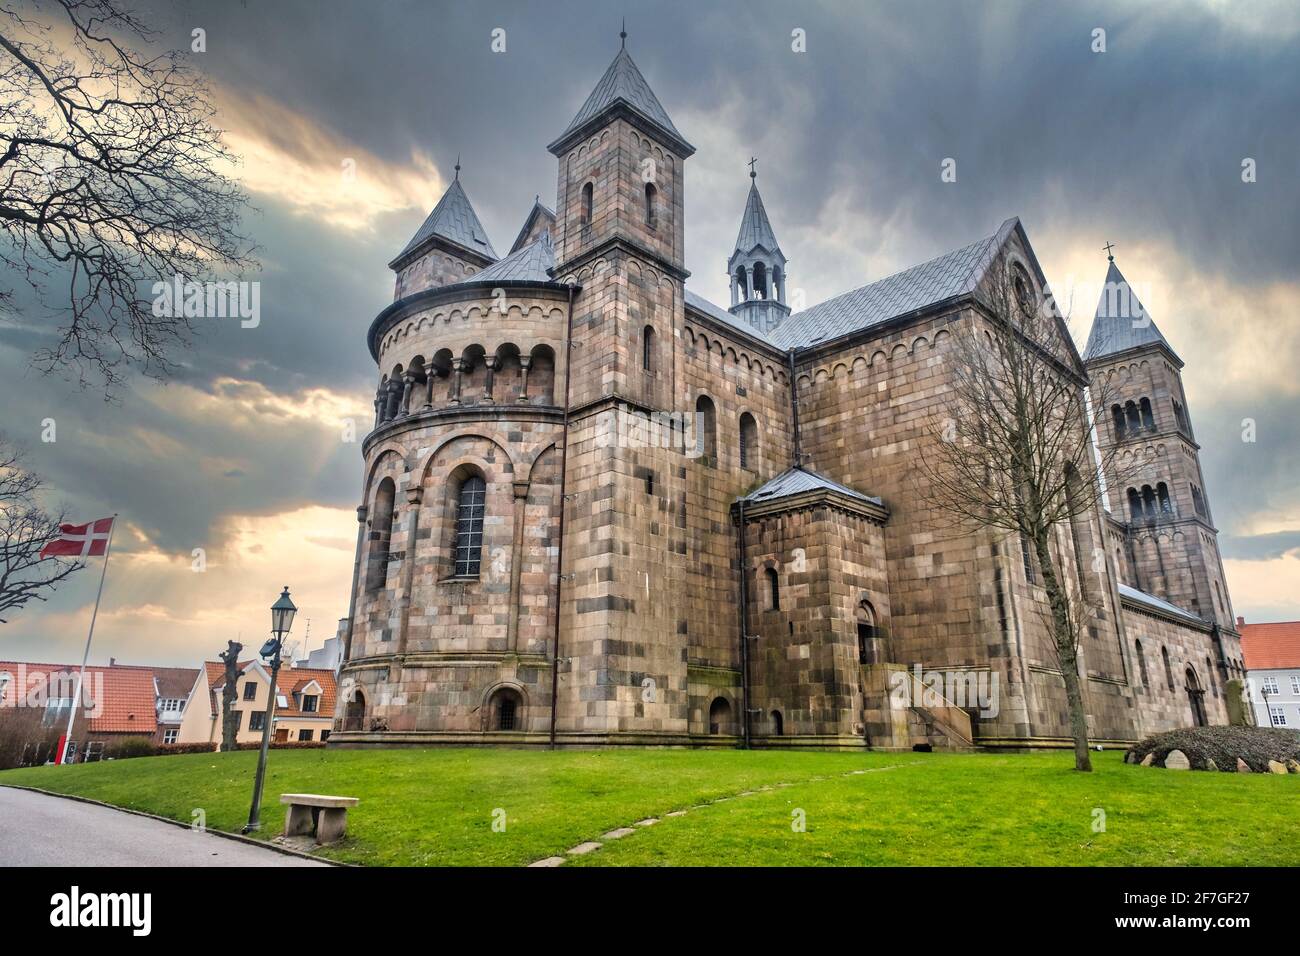 Viborg ancient cathedral in the middle of Denmark Stock Photo